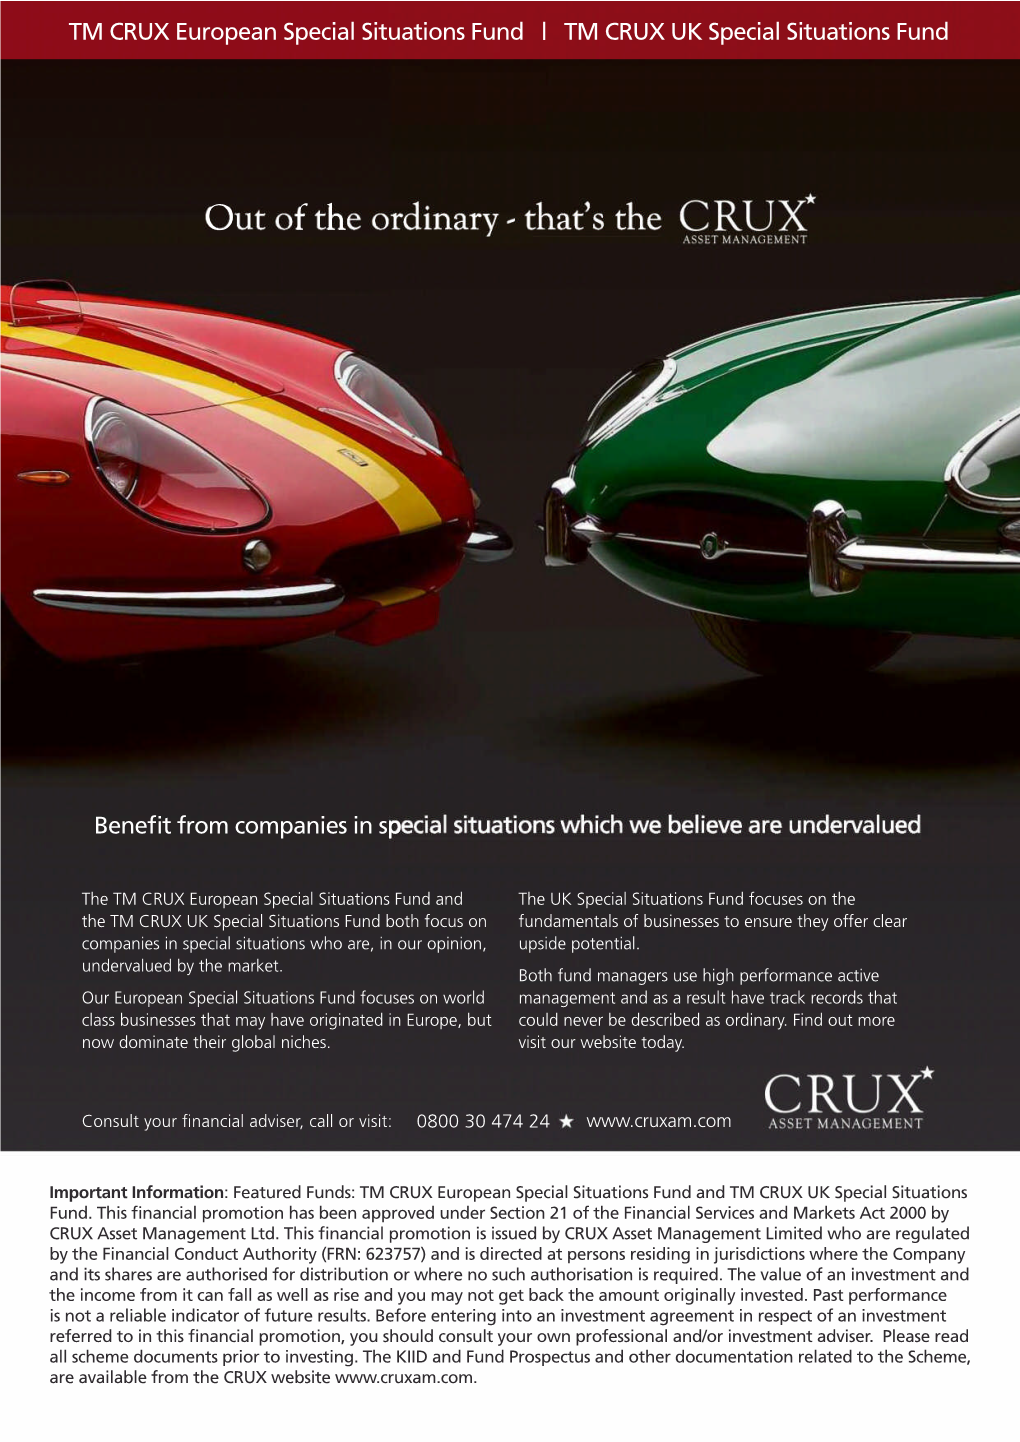 TM CRUX UK Special Situations Fund